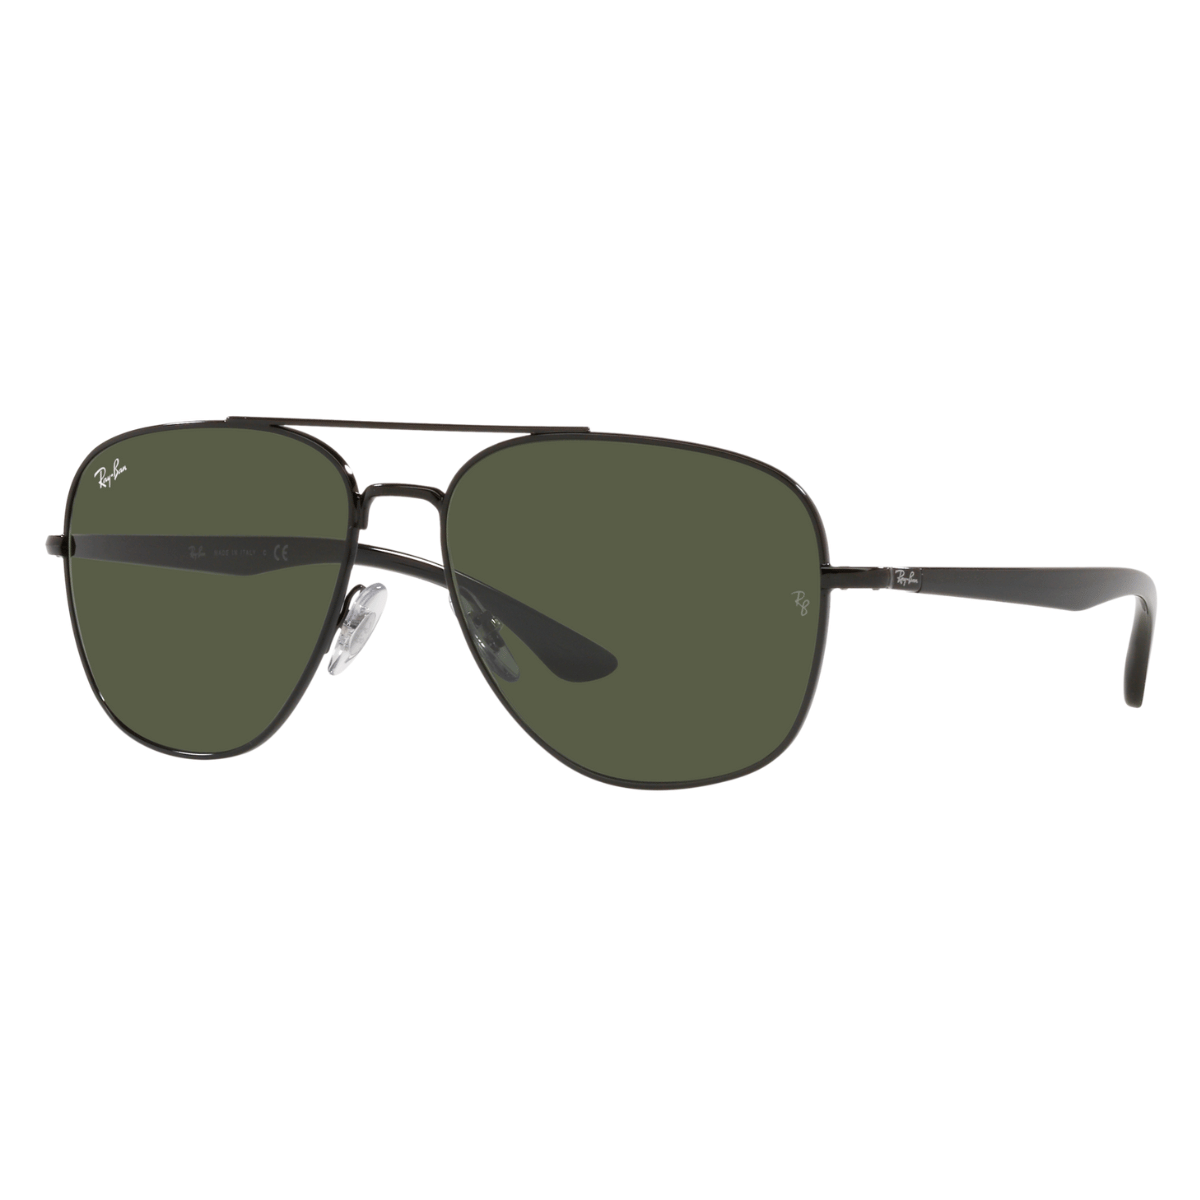 "Rayban 3683 sunglasses in polished black with green lenses, highlighting the blend of classic elegance and modern sophistication available at Optorium for men."